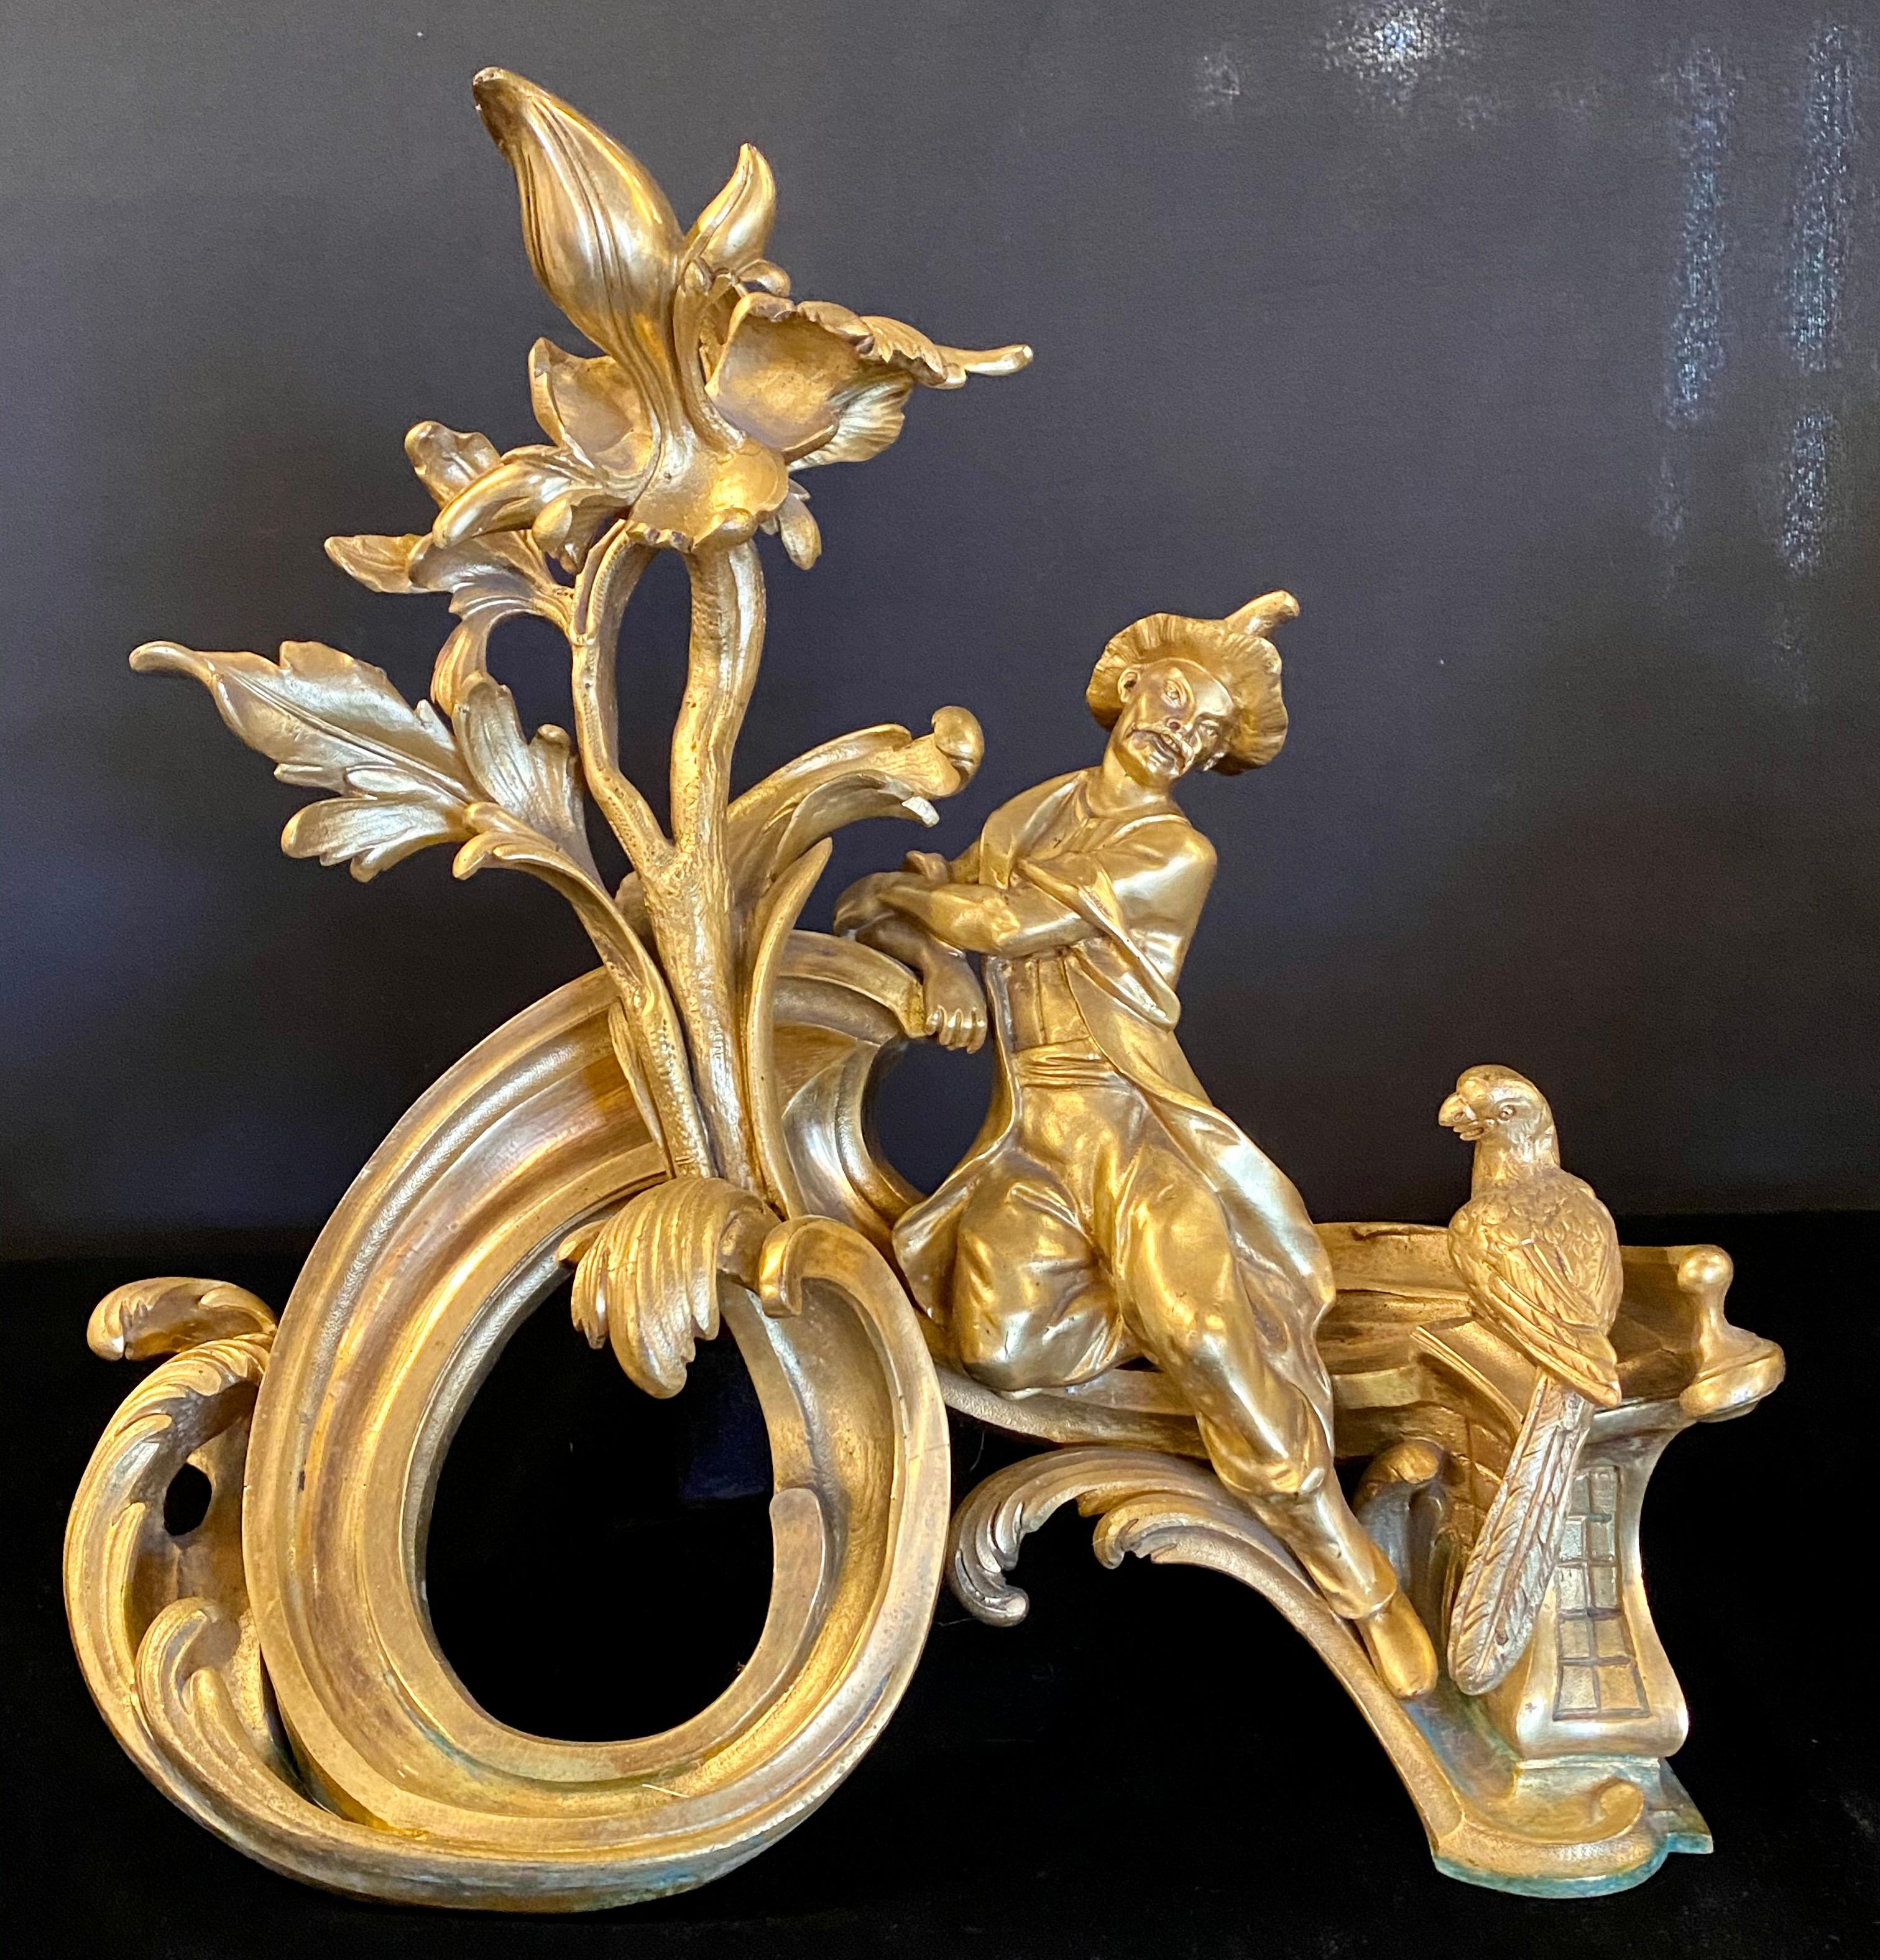 19th century pair of dore bronze chenets andirons signed bird with man and woman. A spectacular pair of dore bronze chenets or andirons each depicting a long tailed bird with seated Asian man and woman. (Description Sothebys NY formally Park Bennet